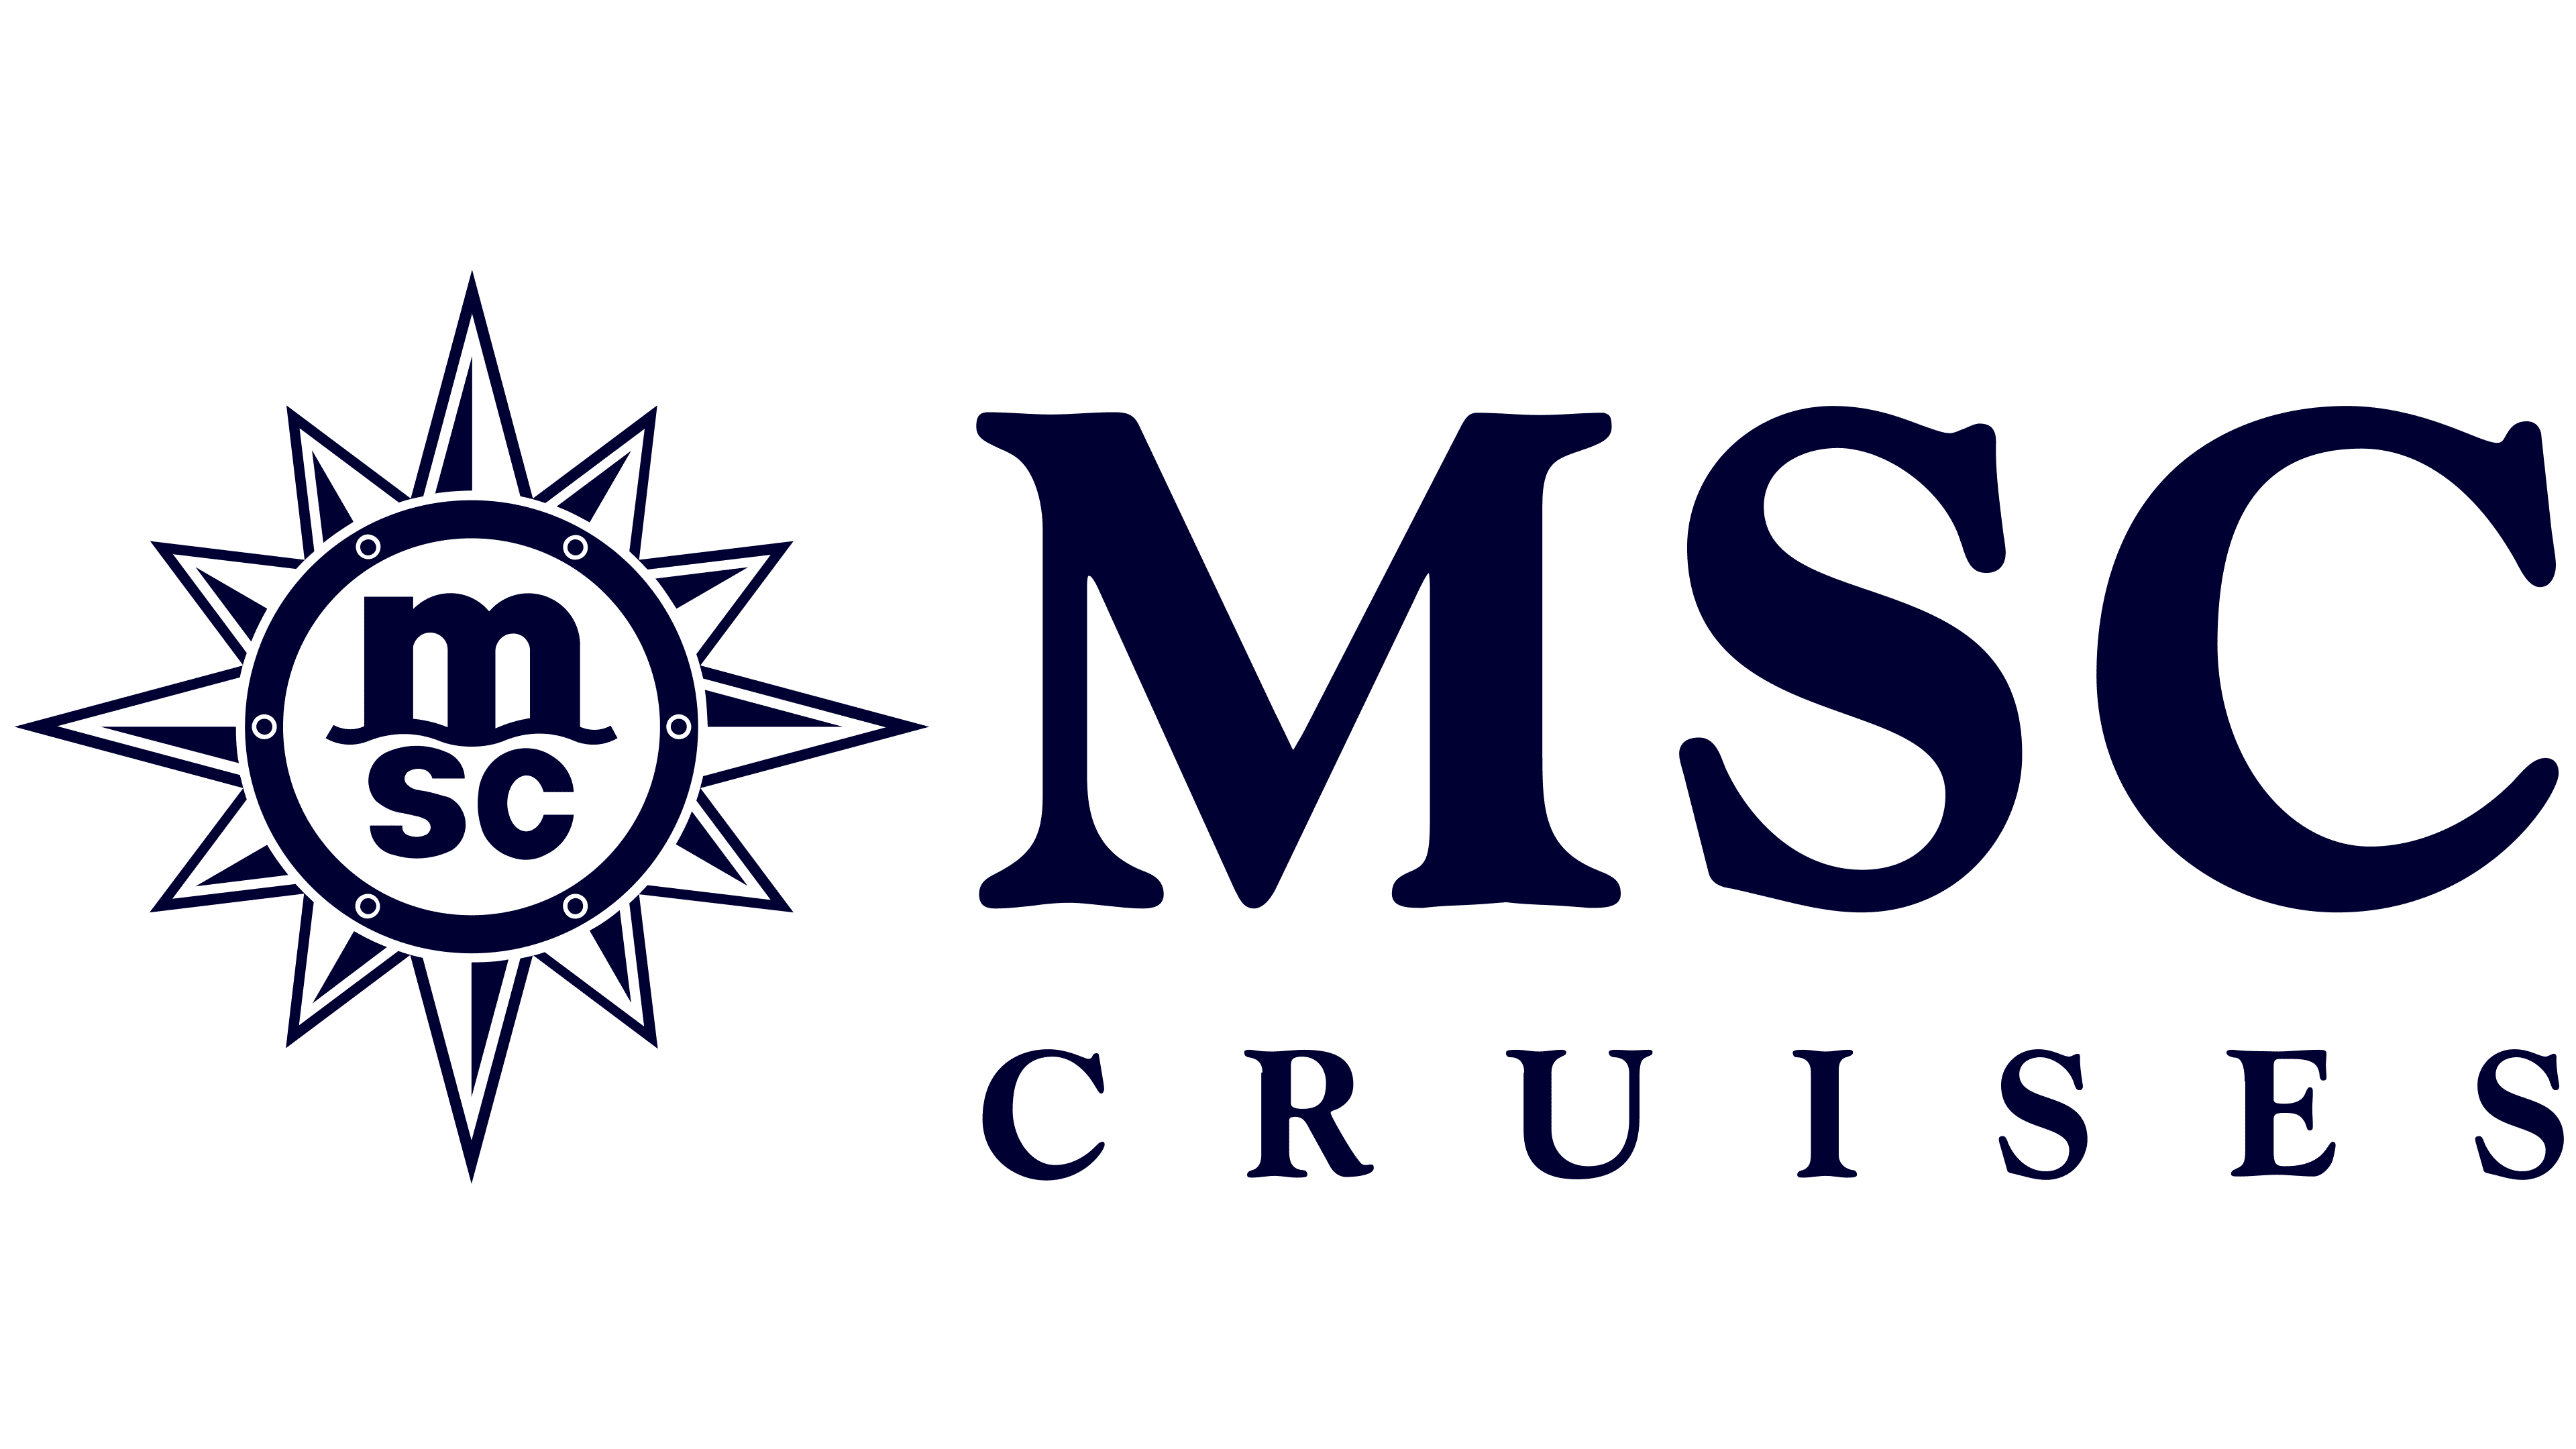 cruise company meaning